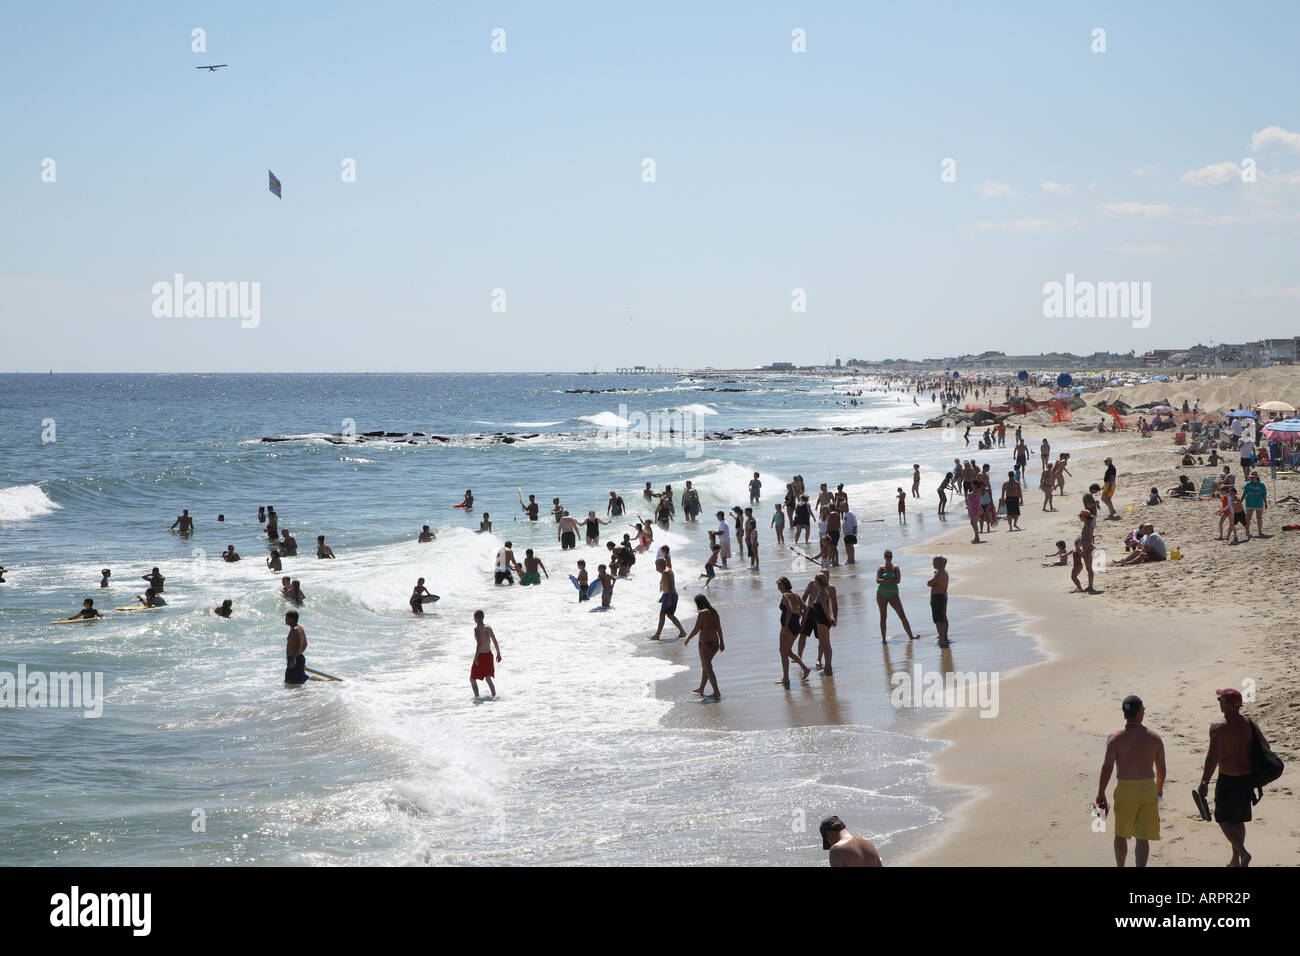 Mass of people playing in shallow surf at oceans edge with plane dragging large advertising banner overhead. Stock Photo